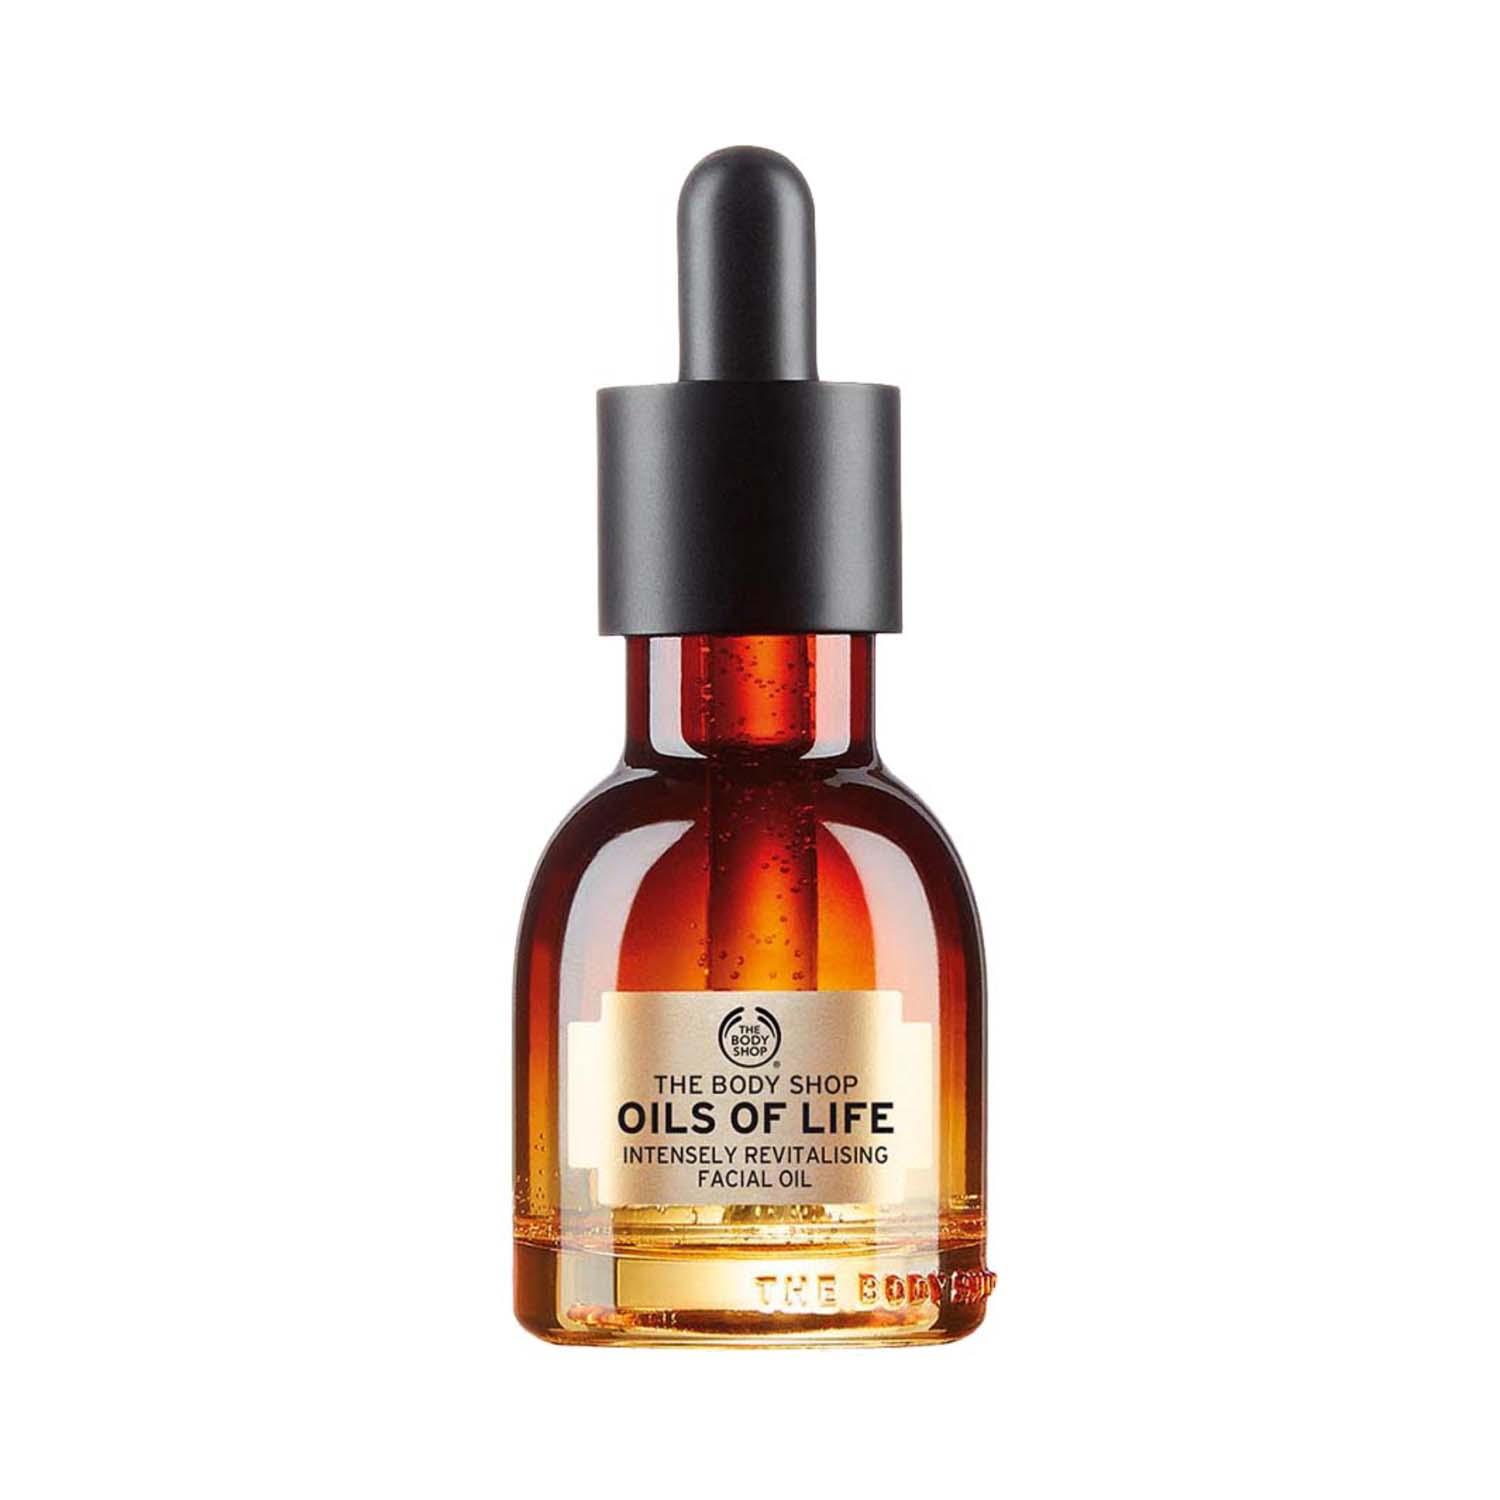 The Body Shop | The Body Shop Oils Of Life Intensely Revitalizing Facial Oil (30 ml)